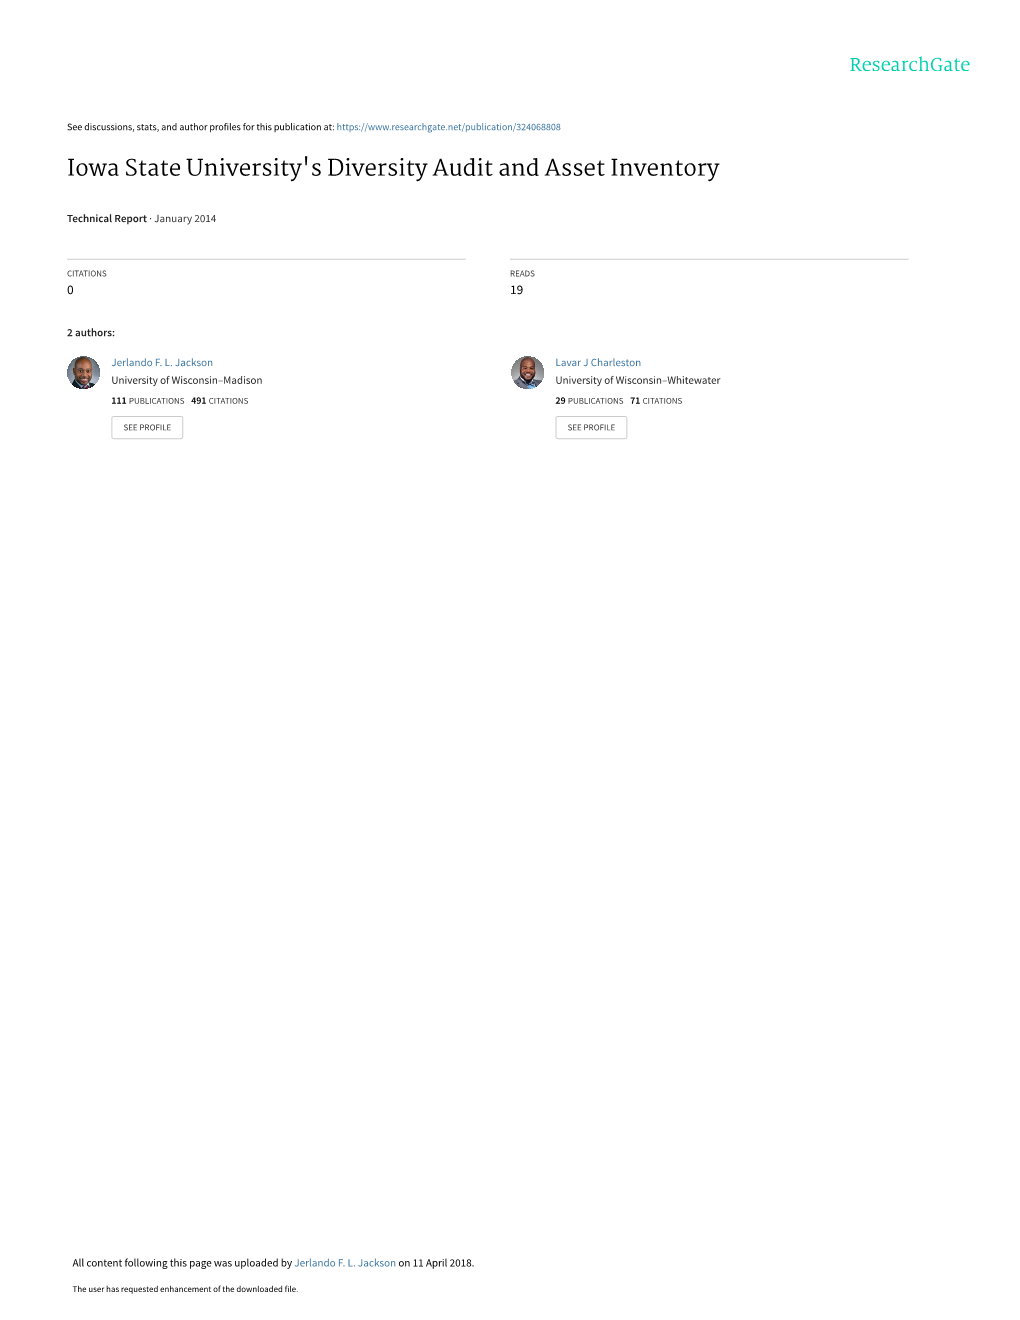 Iowa State University's Diversity Audit and Asset Inventory